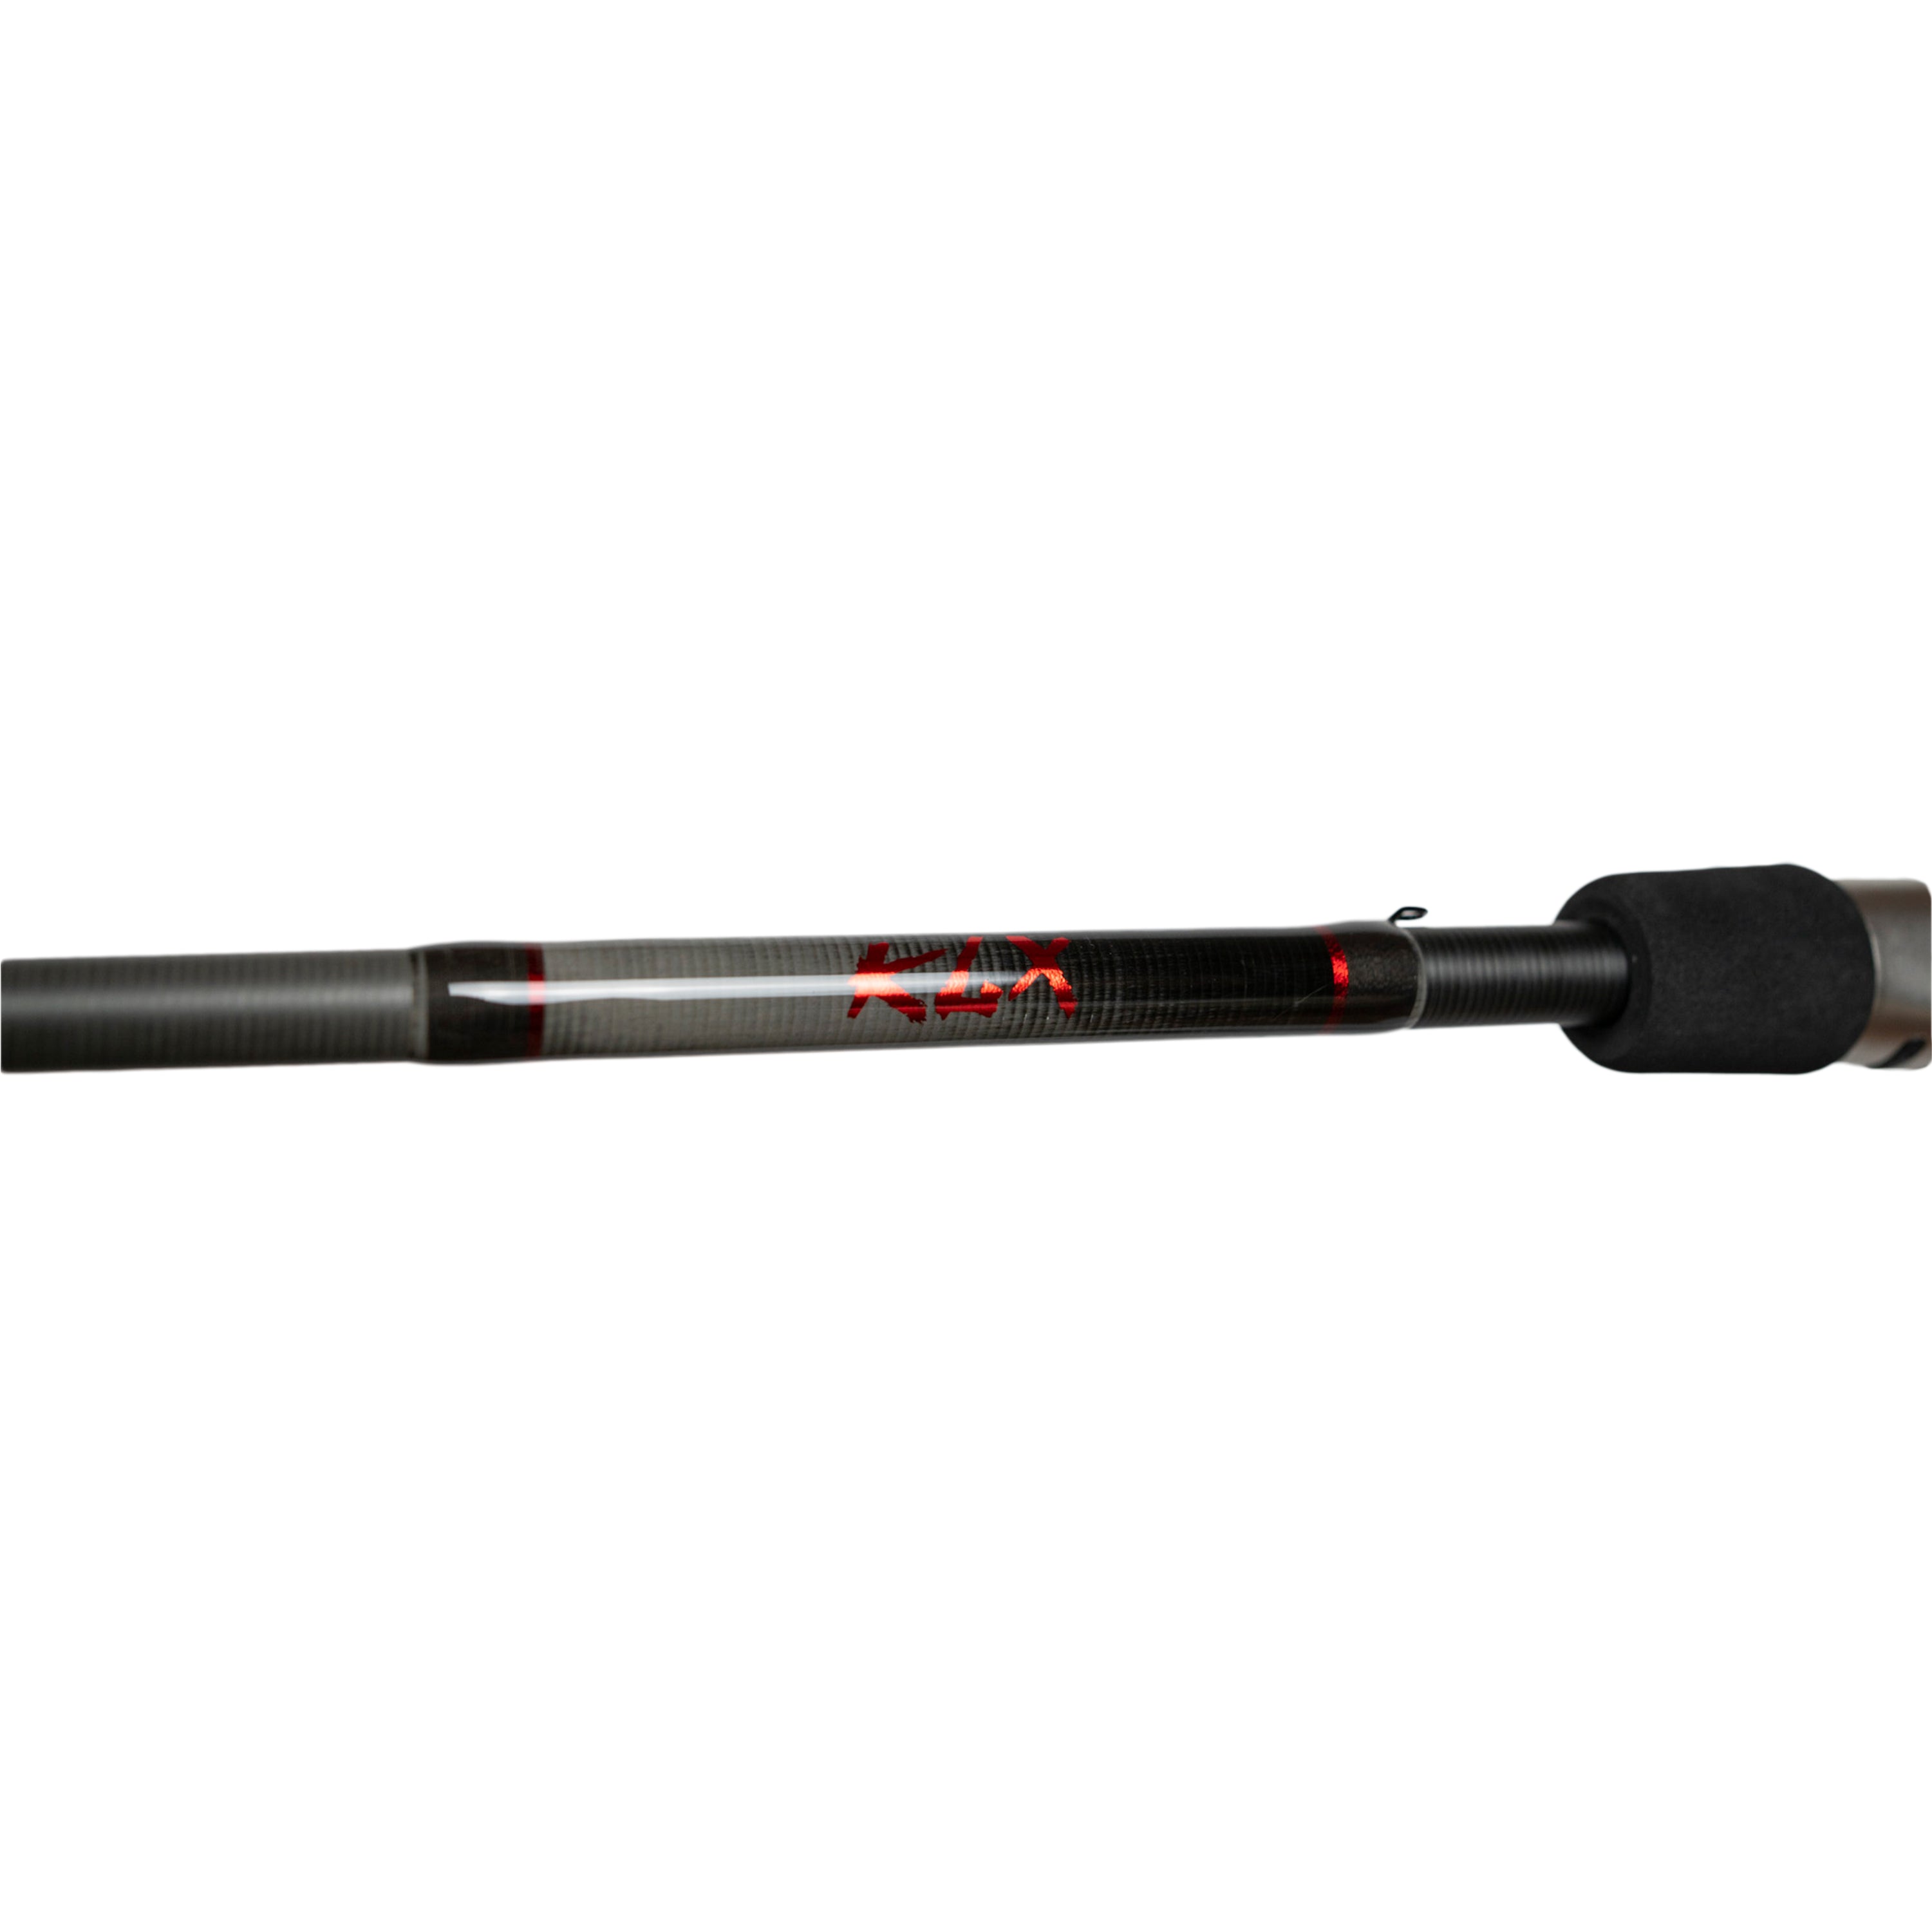 Dropshot Rods - Freshwater Rods